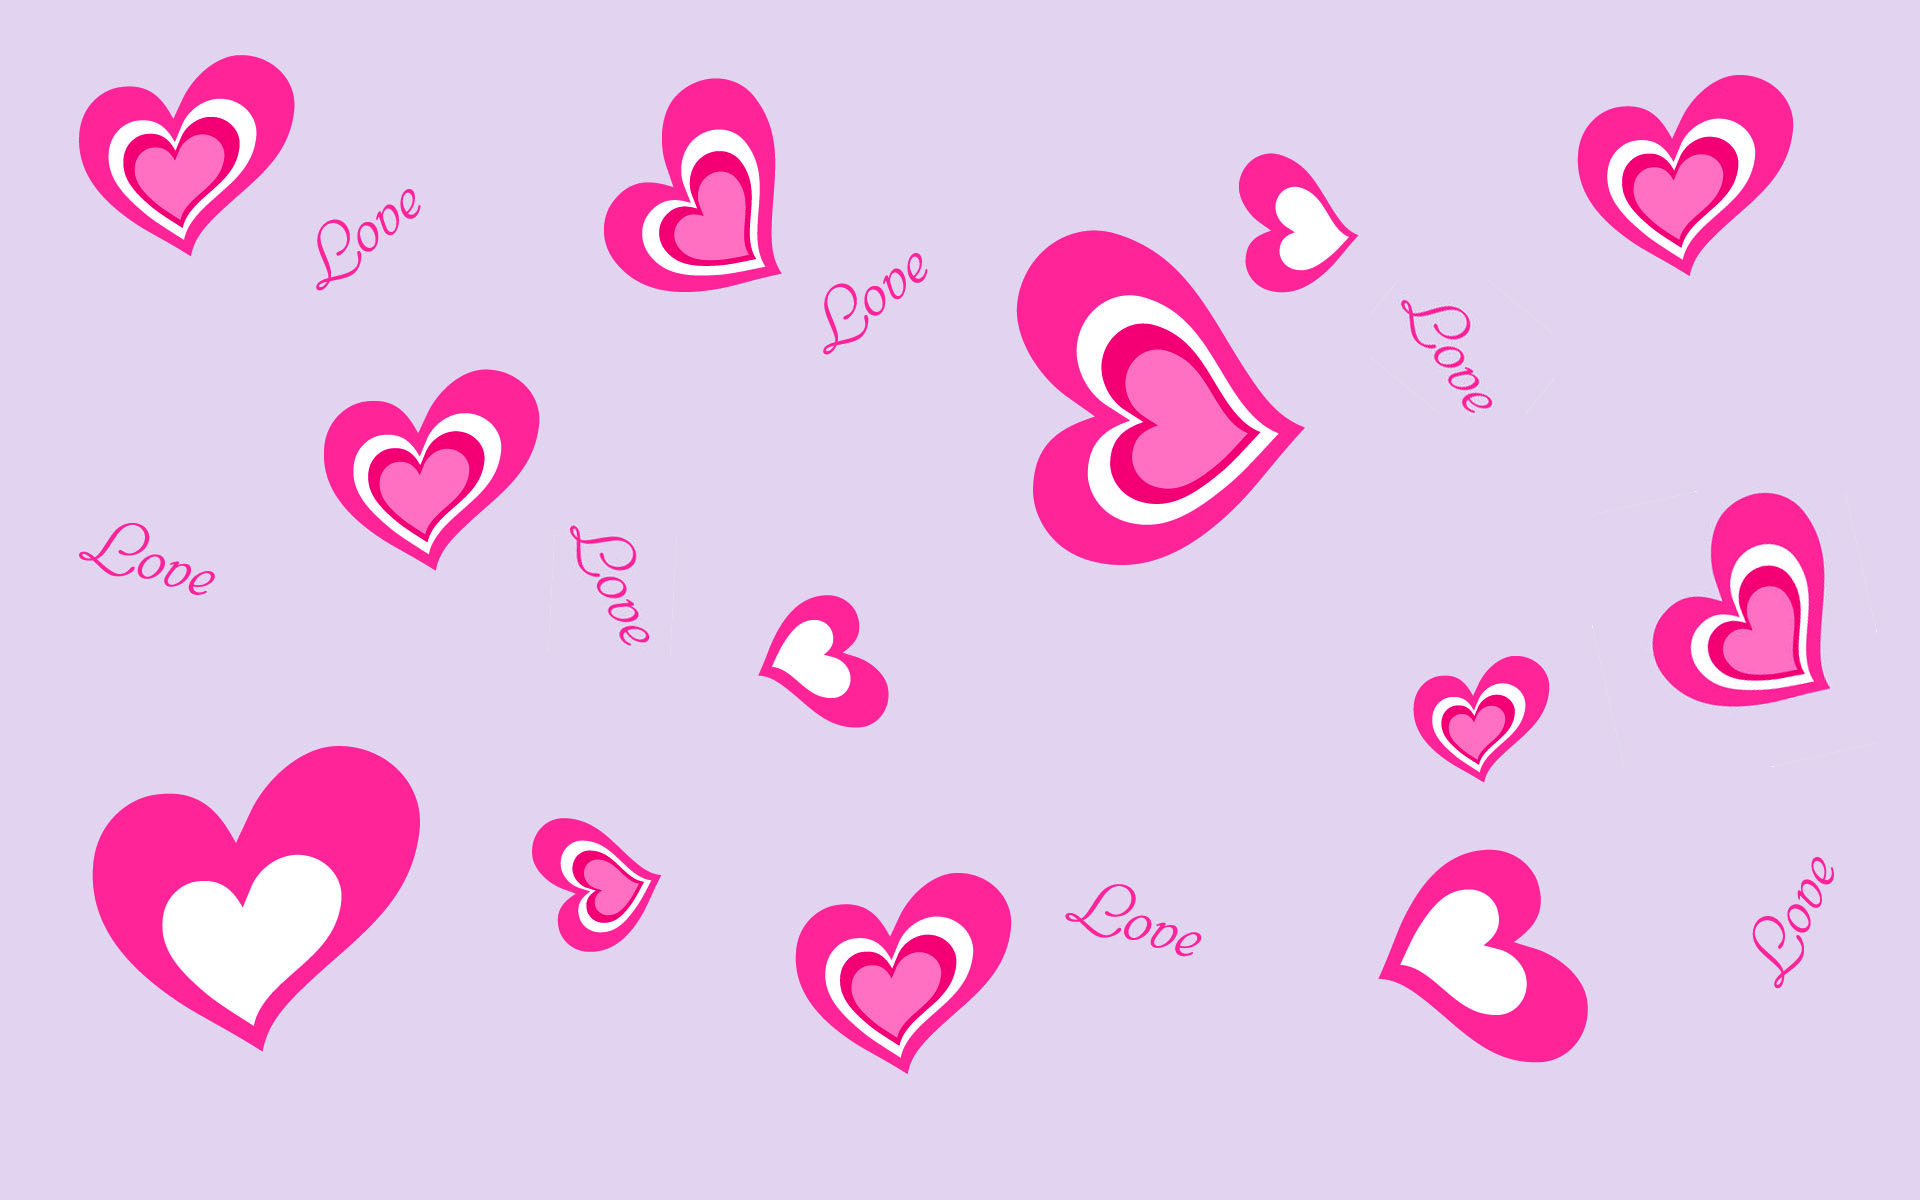 Girly Lovely Hearts   Cool Twitter Backgrounds 1920x1200